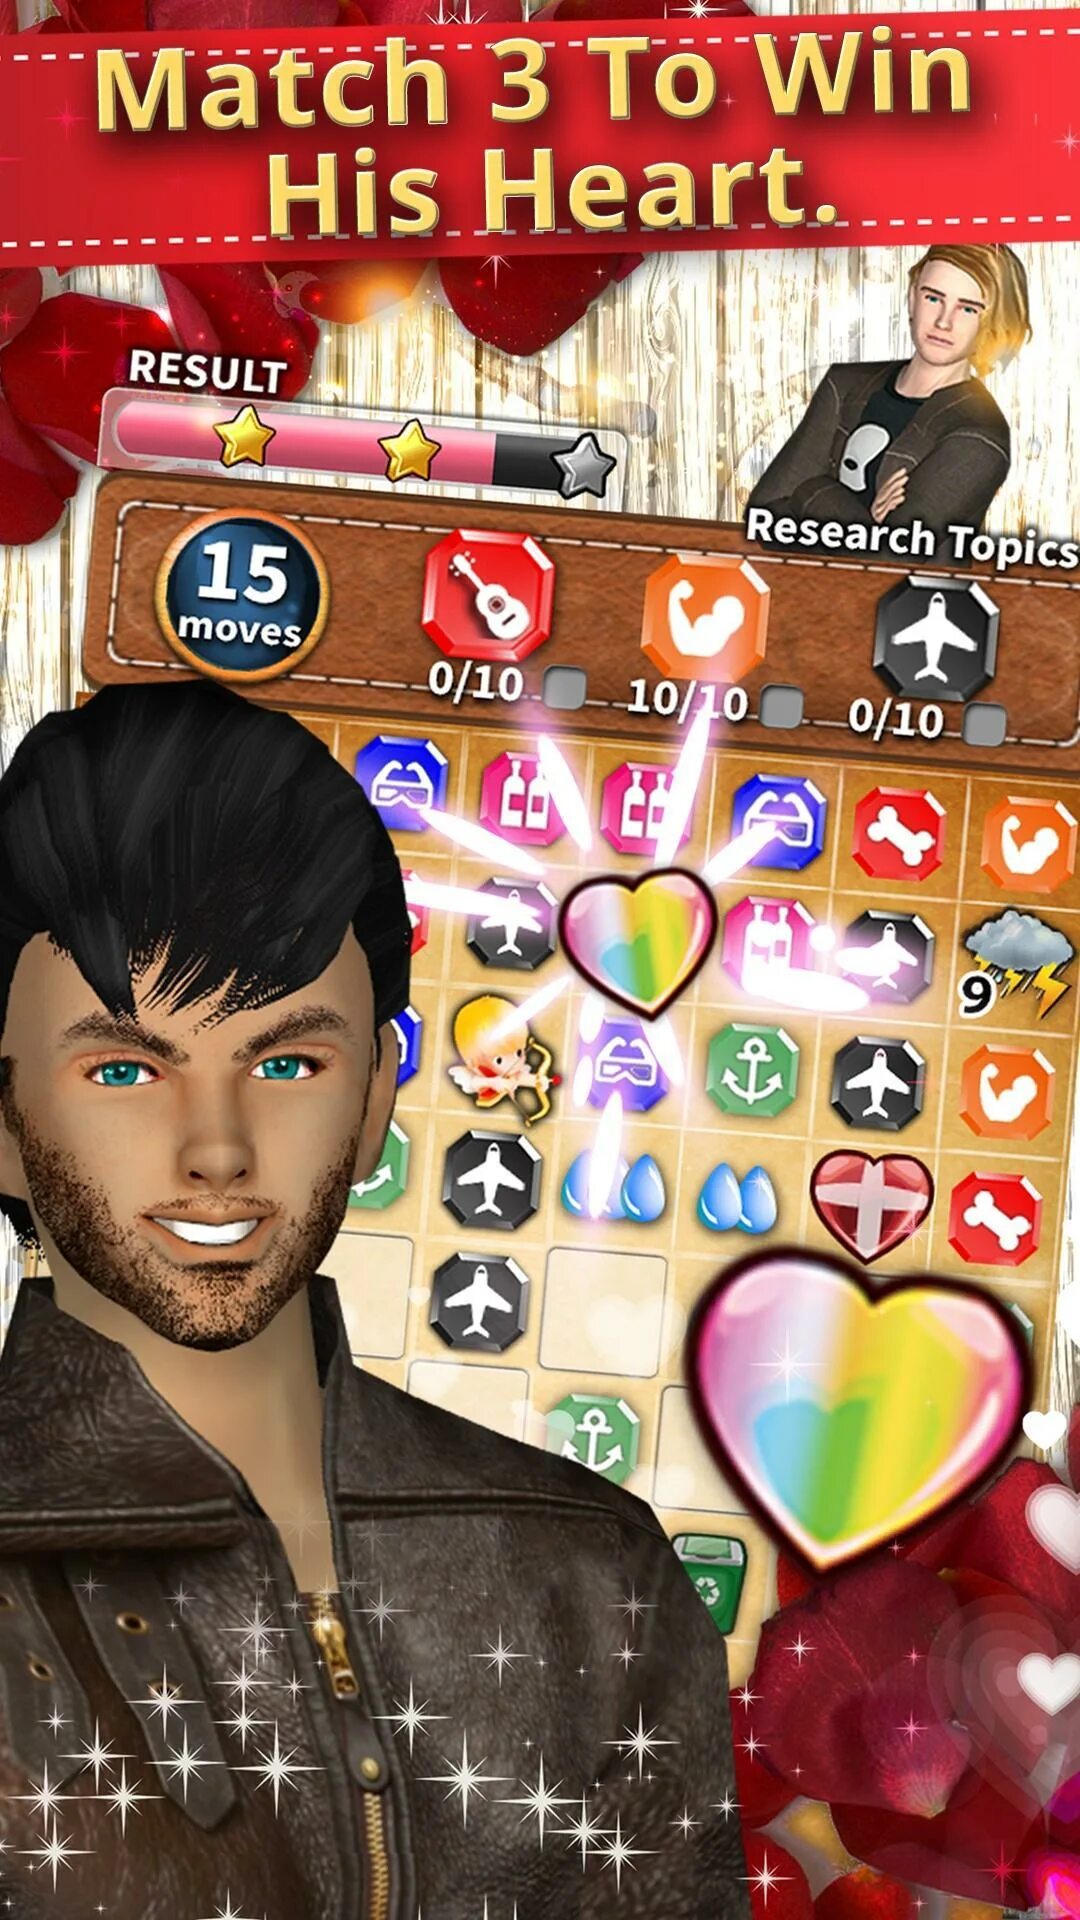 Love dating игра. Dating game Android. 3d dating game. Love dating игра отписаться.